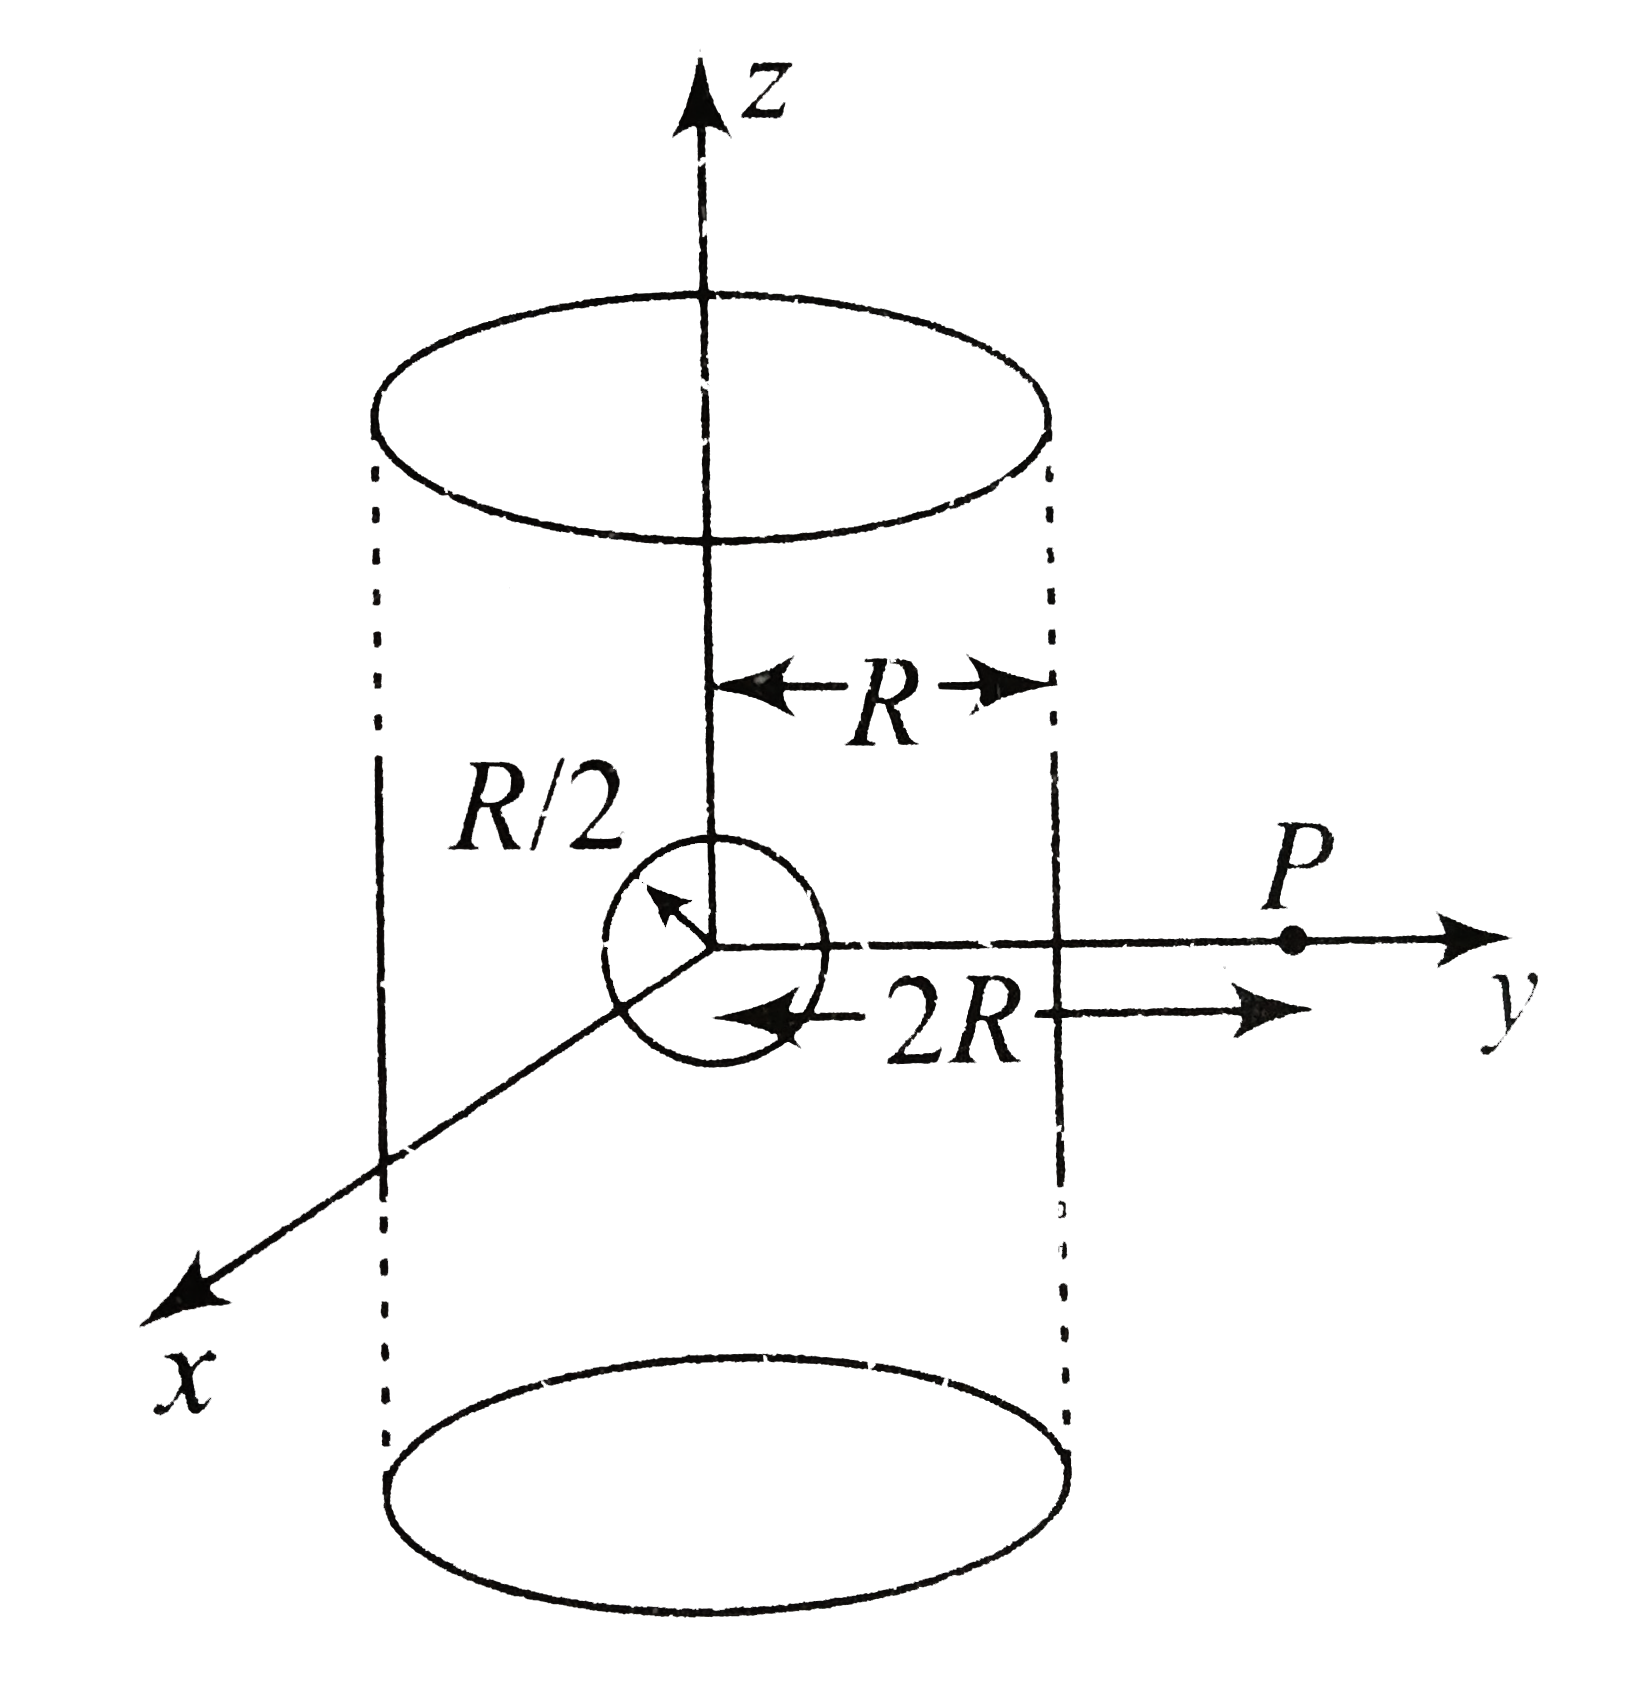 An infinitely long solid cylinder of radius R has a uniform vlume charge density rho. It has a spherical cavity of radius R//2 with its center on the axis of the culinder, as shown in the figure. The magnitude of the electric field at the point P, which is at a distance 2R from the axis of the cylinder, is given by the expression  23rhoR//16kepsilon0. The value of k is